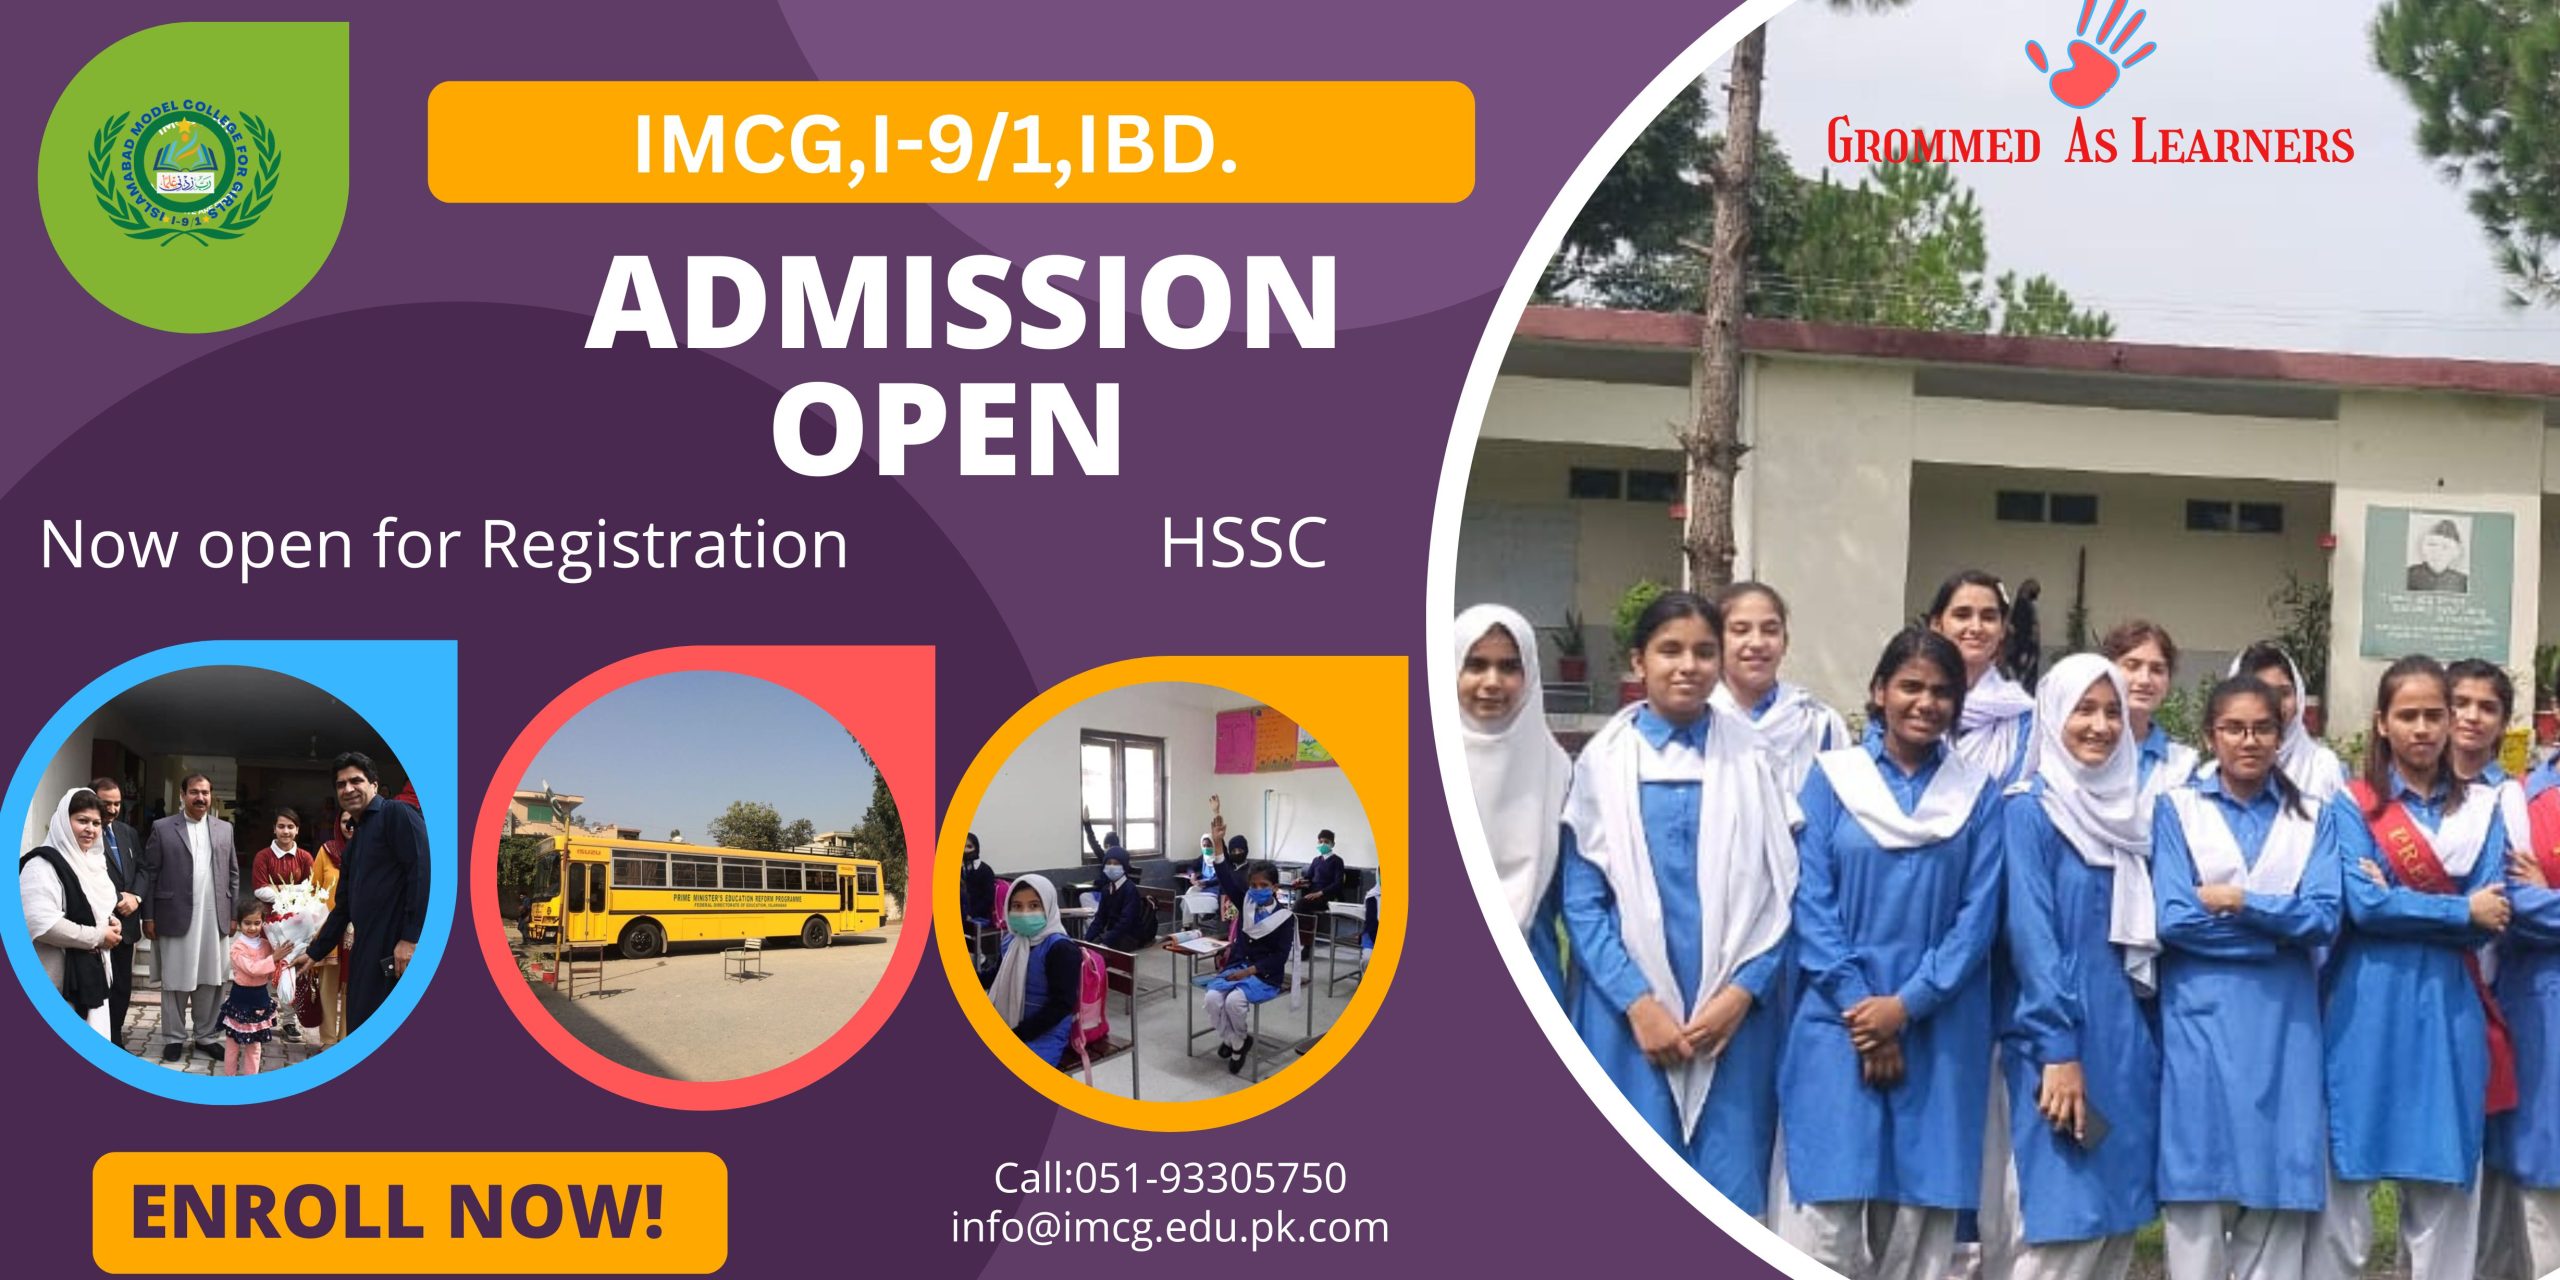 Admission open (1300 × 650 mm)